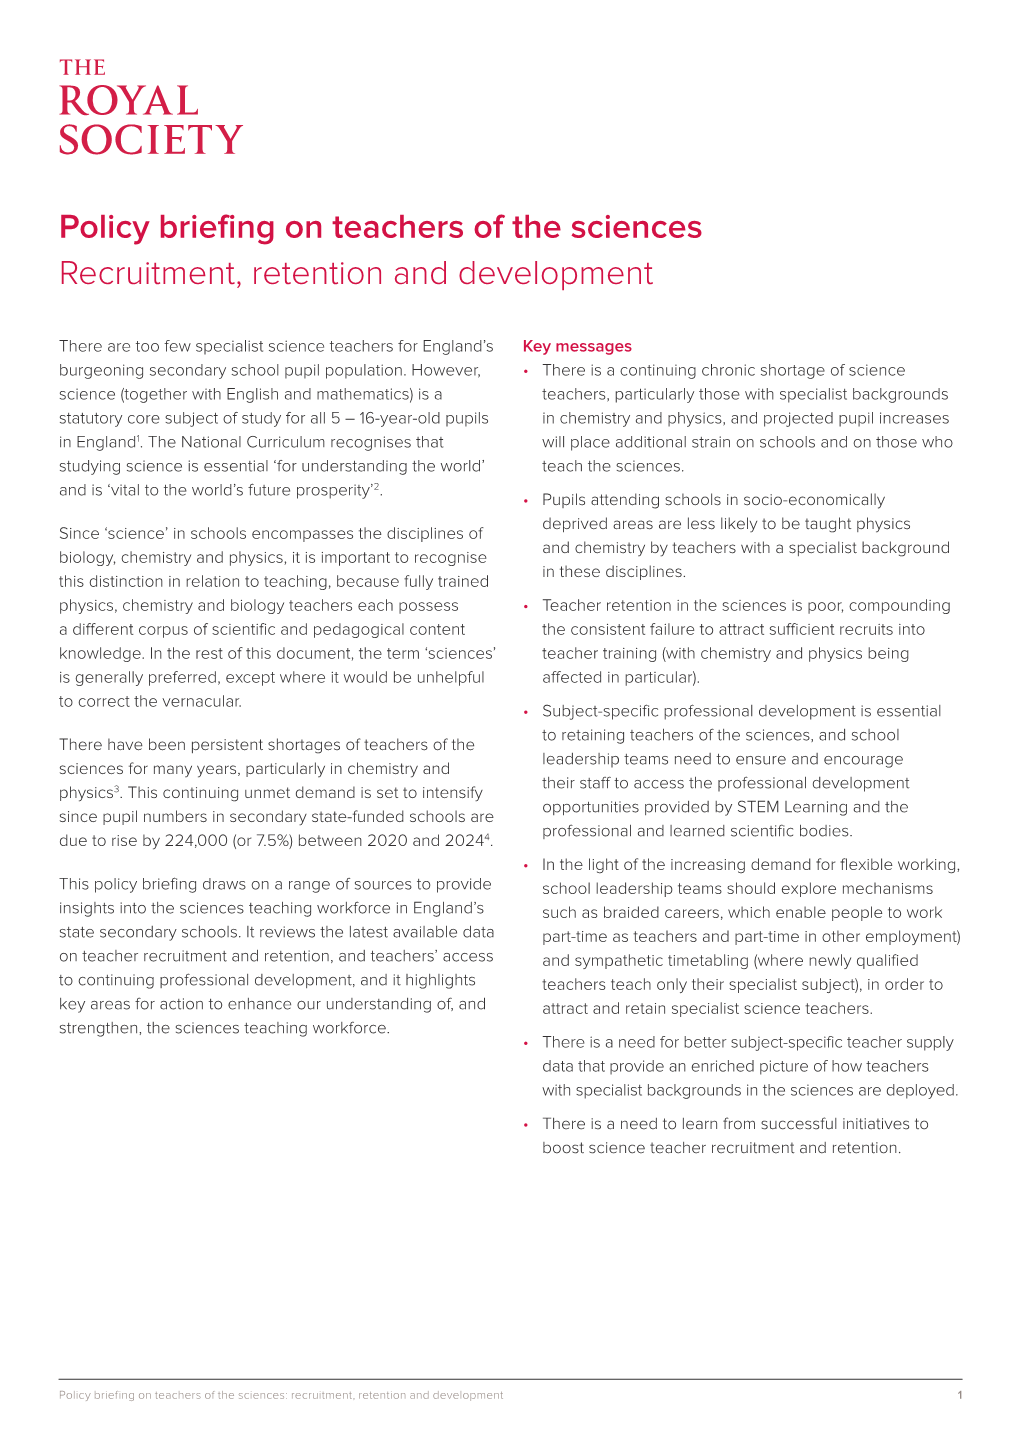 Policy Briefing on Teachers of the Sciences Recruitment, Retention and Development